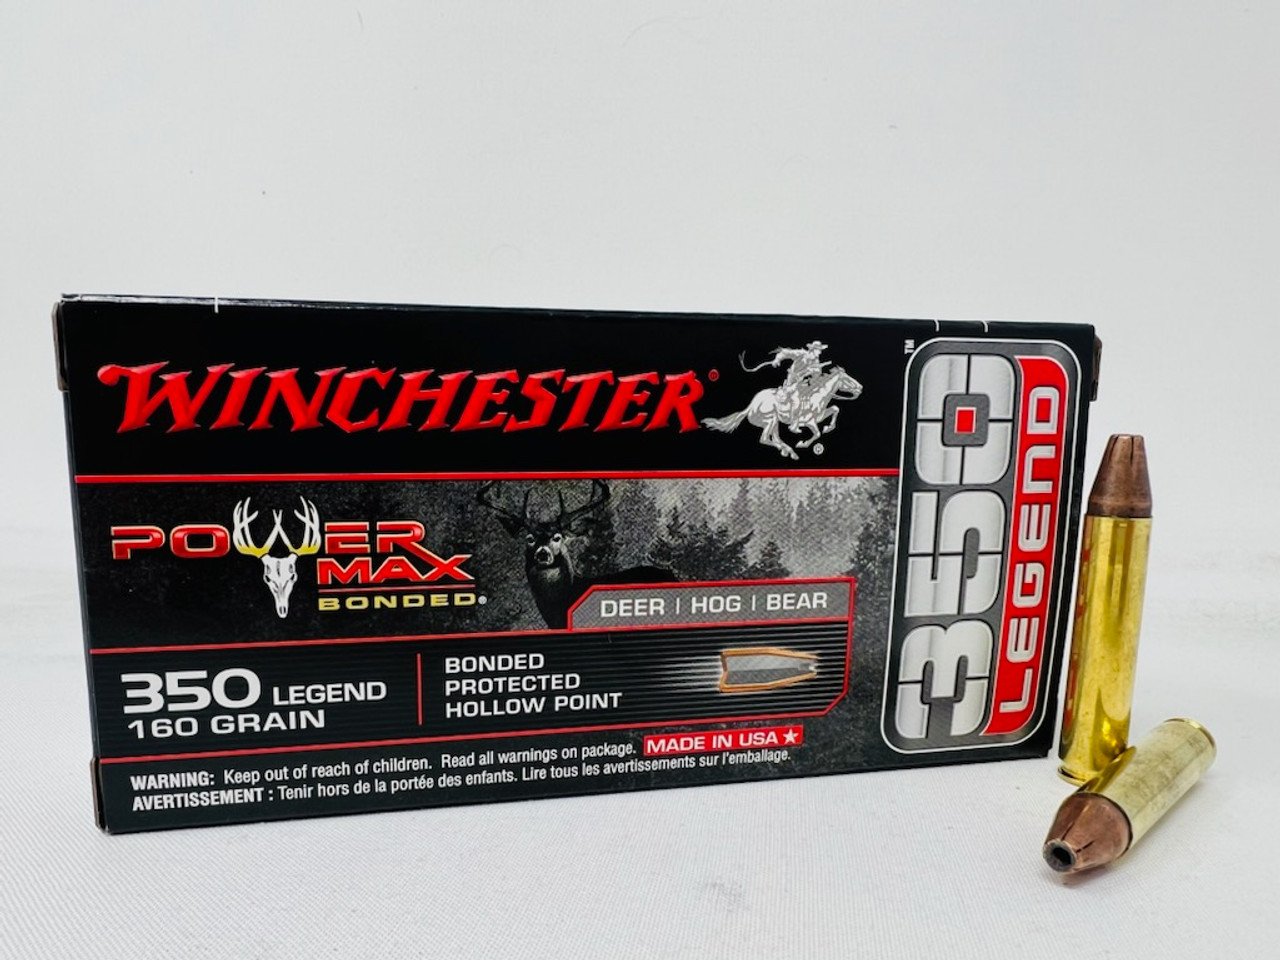 Winchester Power Max Bonded 350 legend